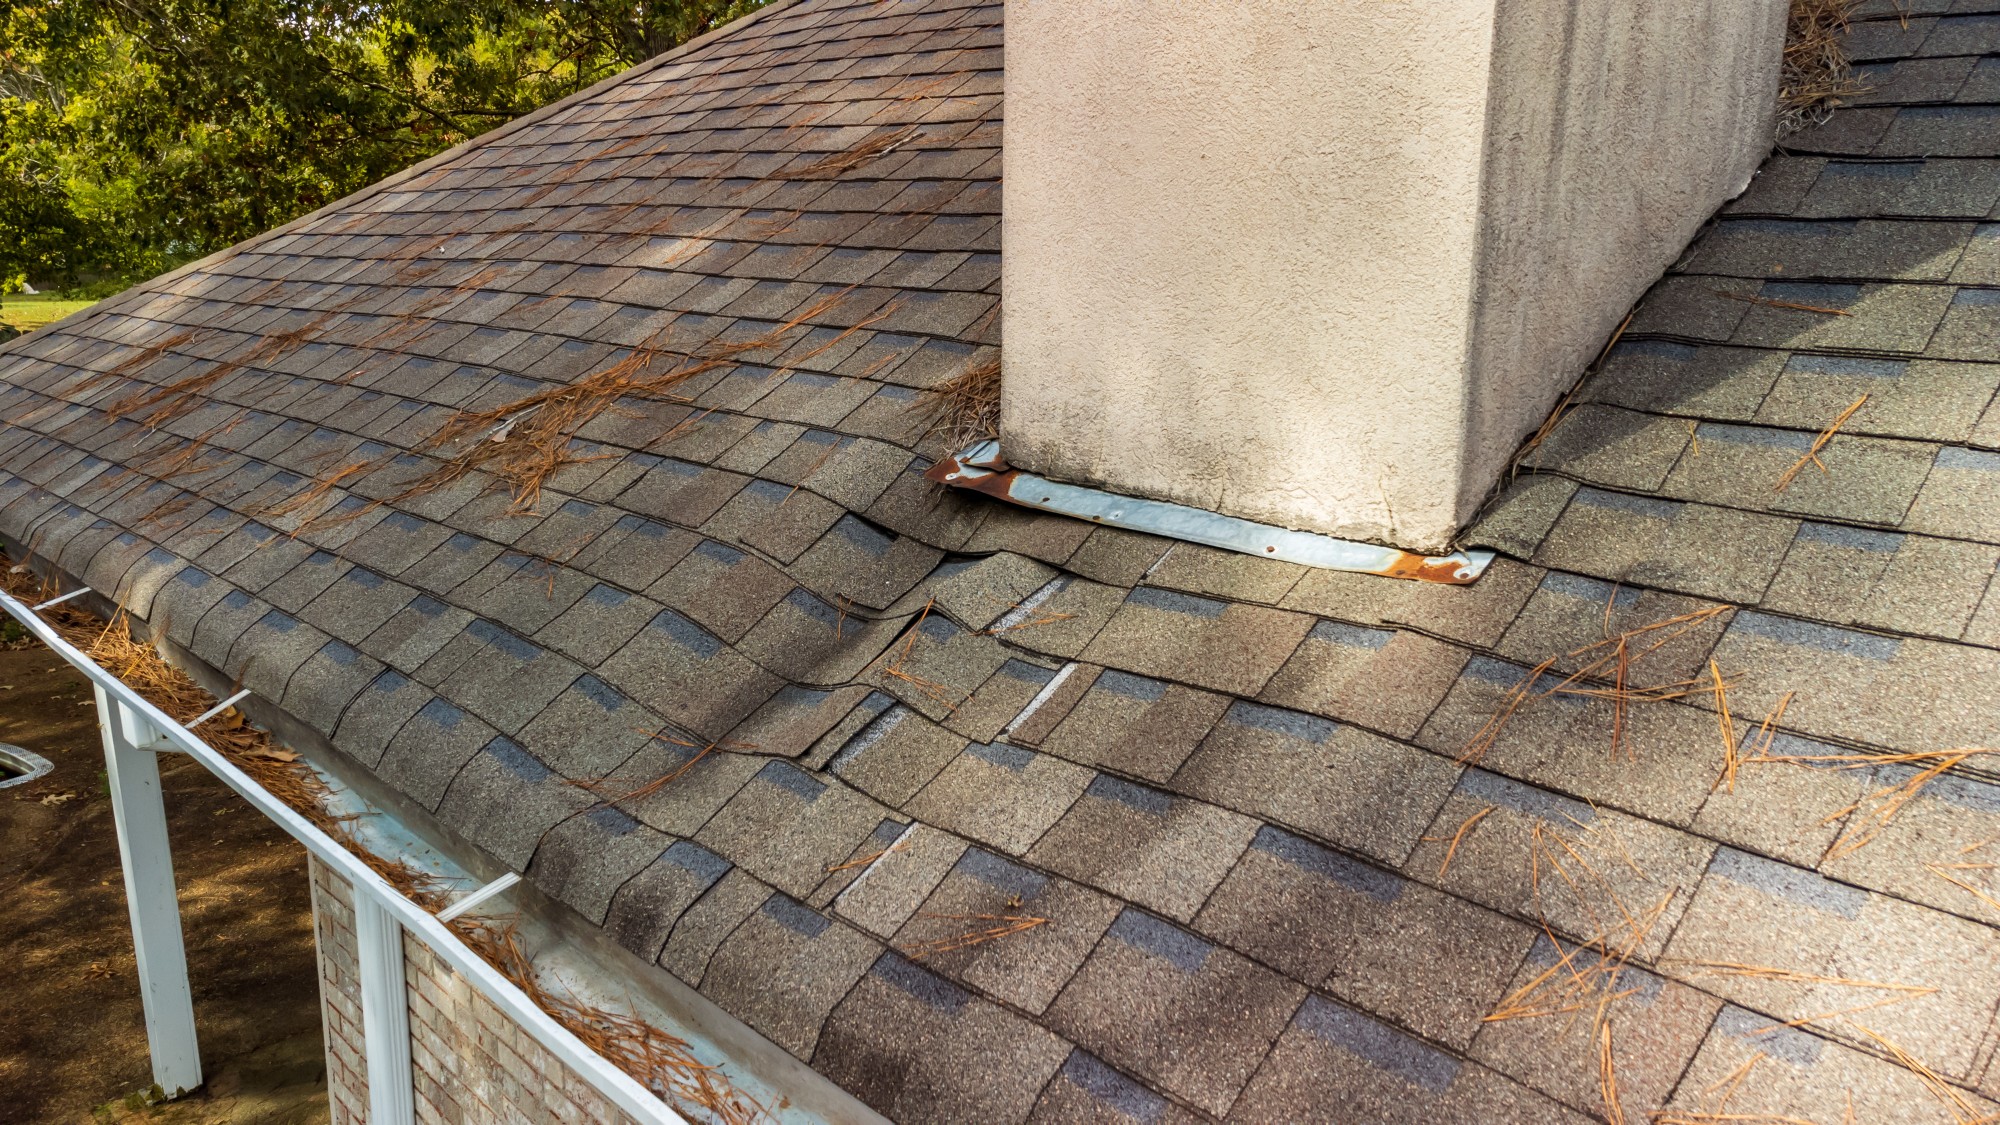 Essential Steps for a Successful Roof Leak Insurance Claim